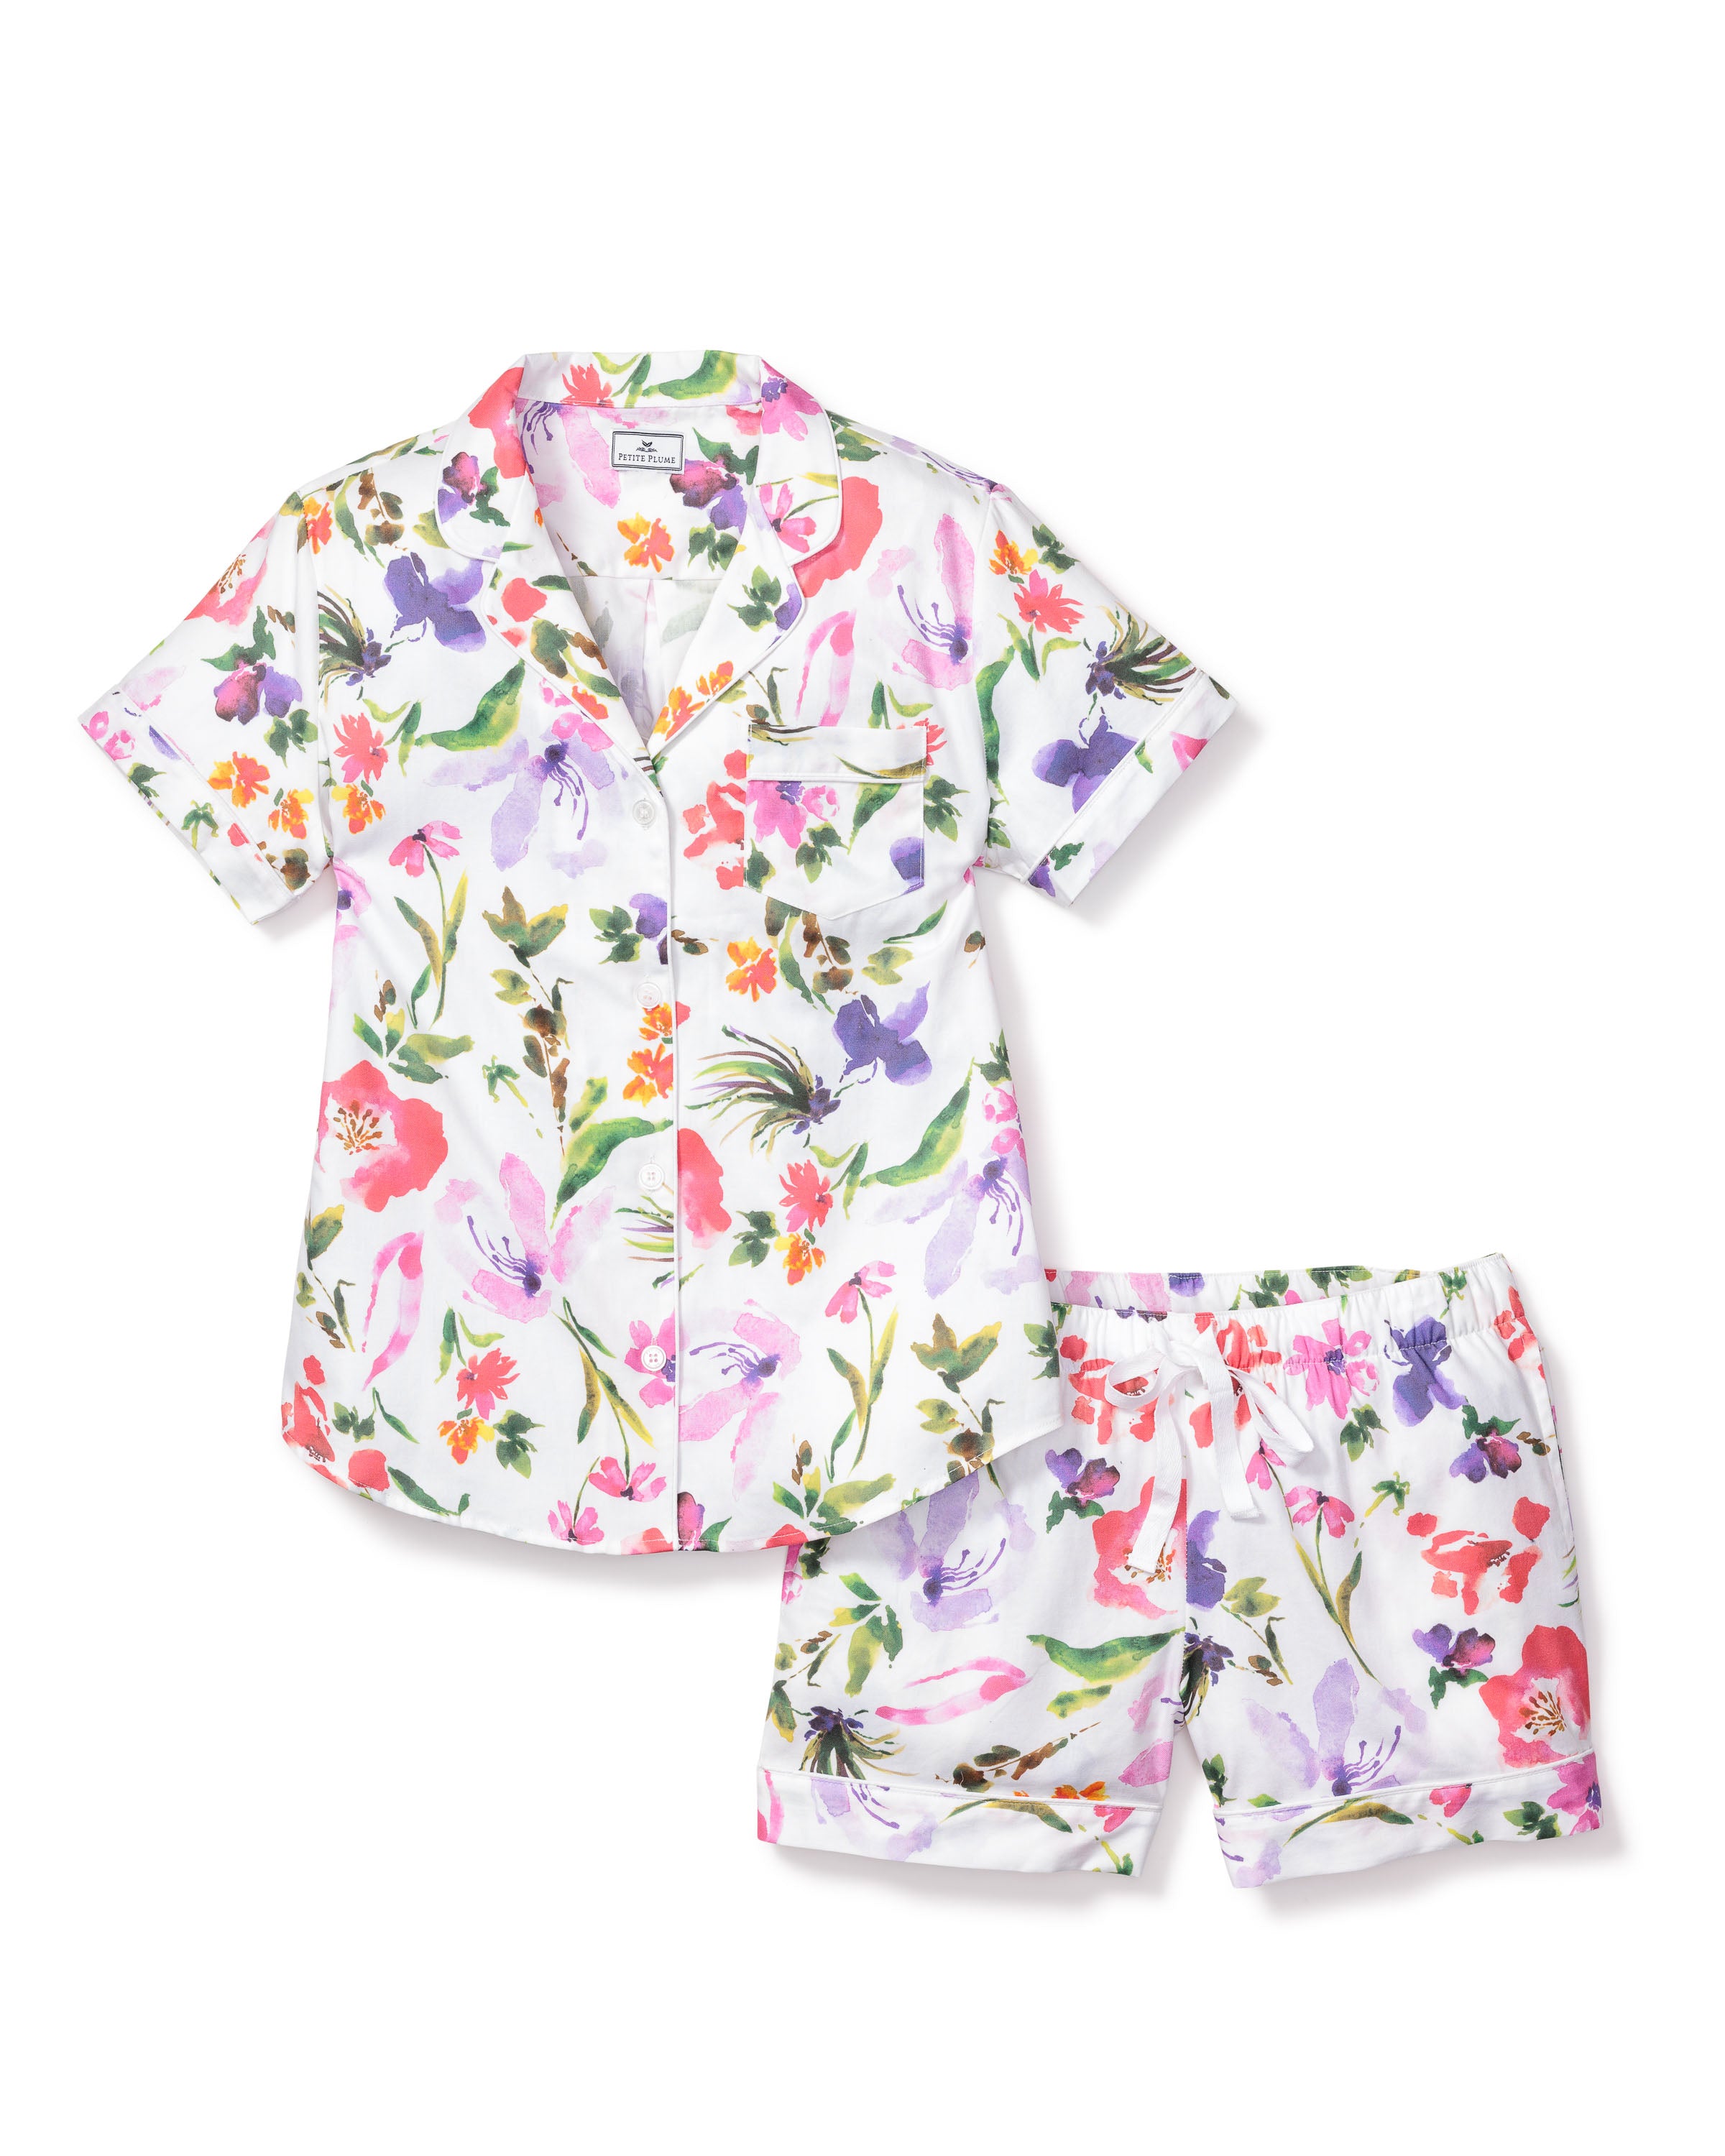 Women's Twill Pajama Short Sleeve Short Set in Gardens of Giverny